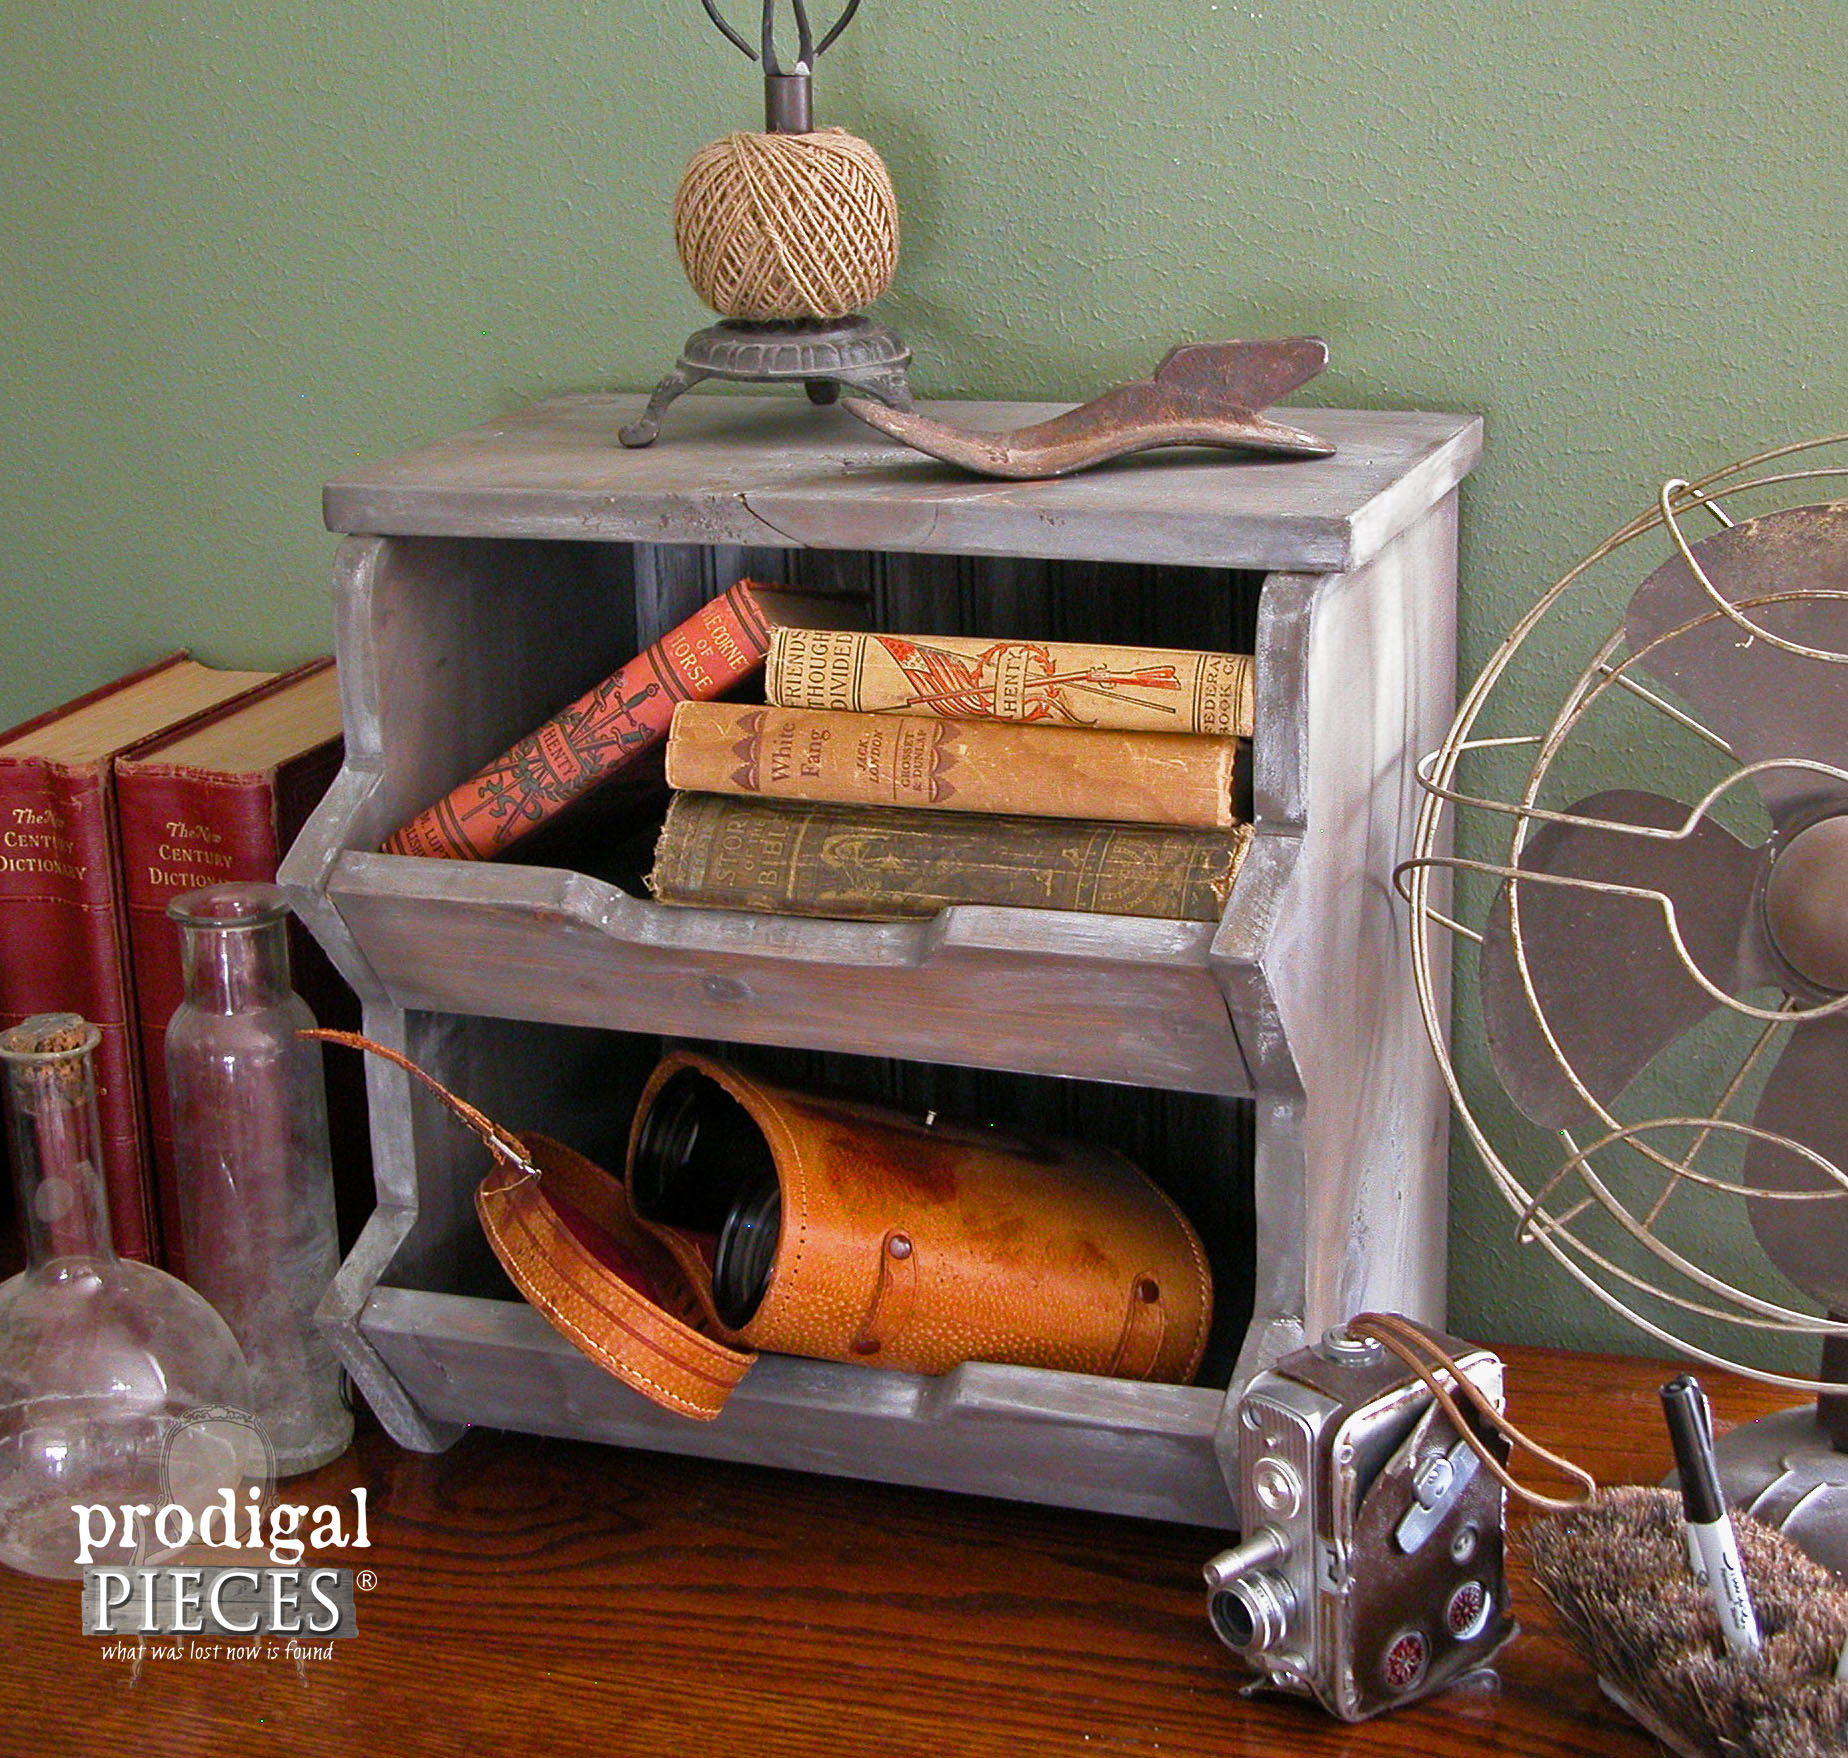 Desk Top Bin with Plans to Build Your Own by Prodigal Pieces | prodigalpieces.com